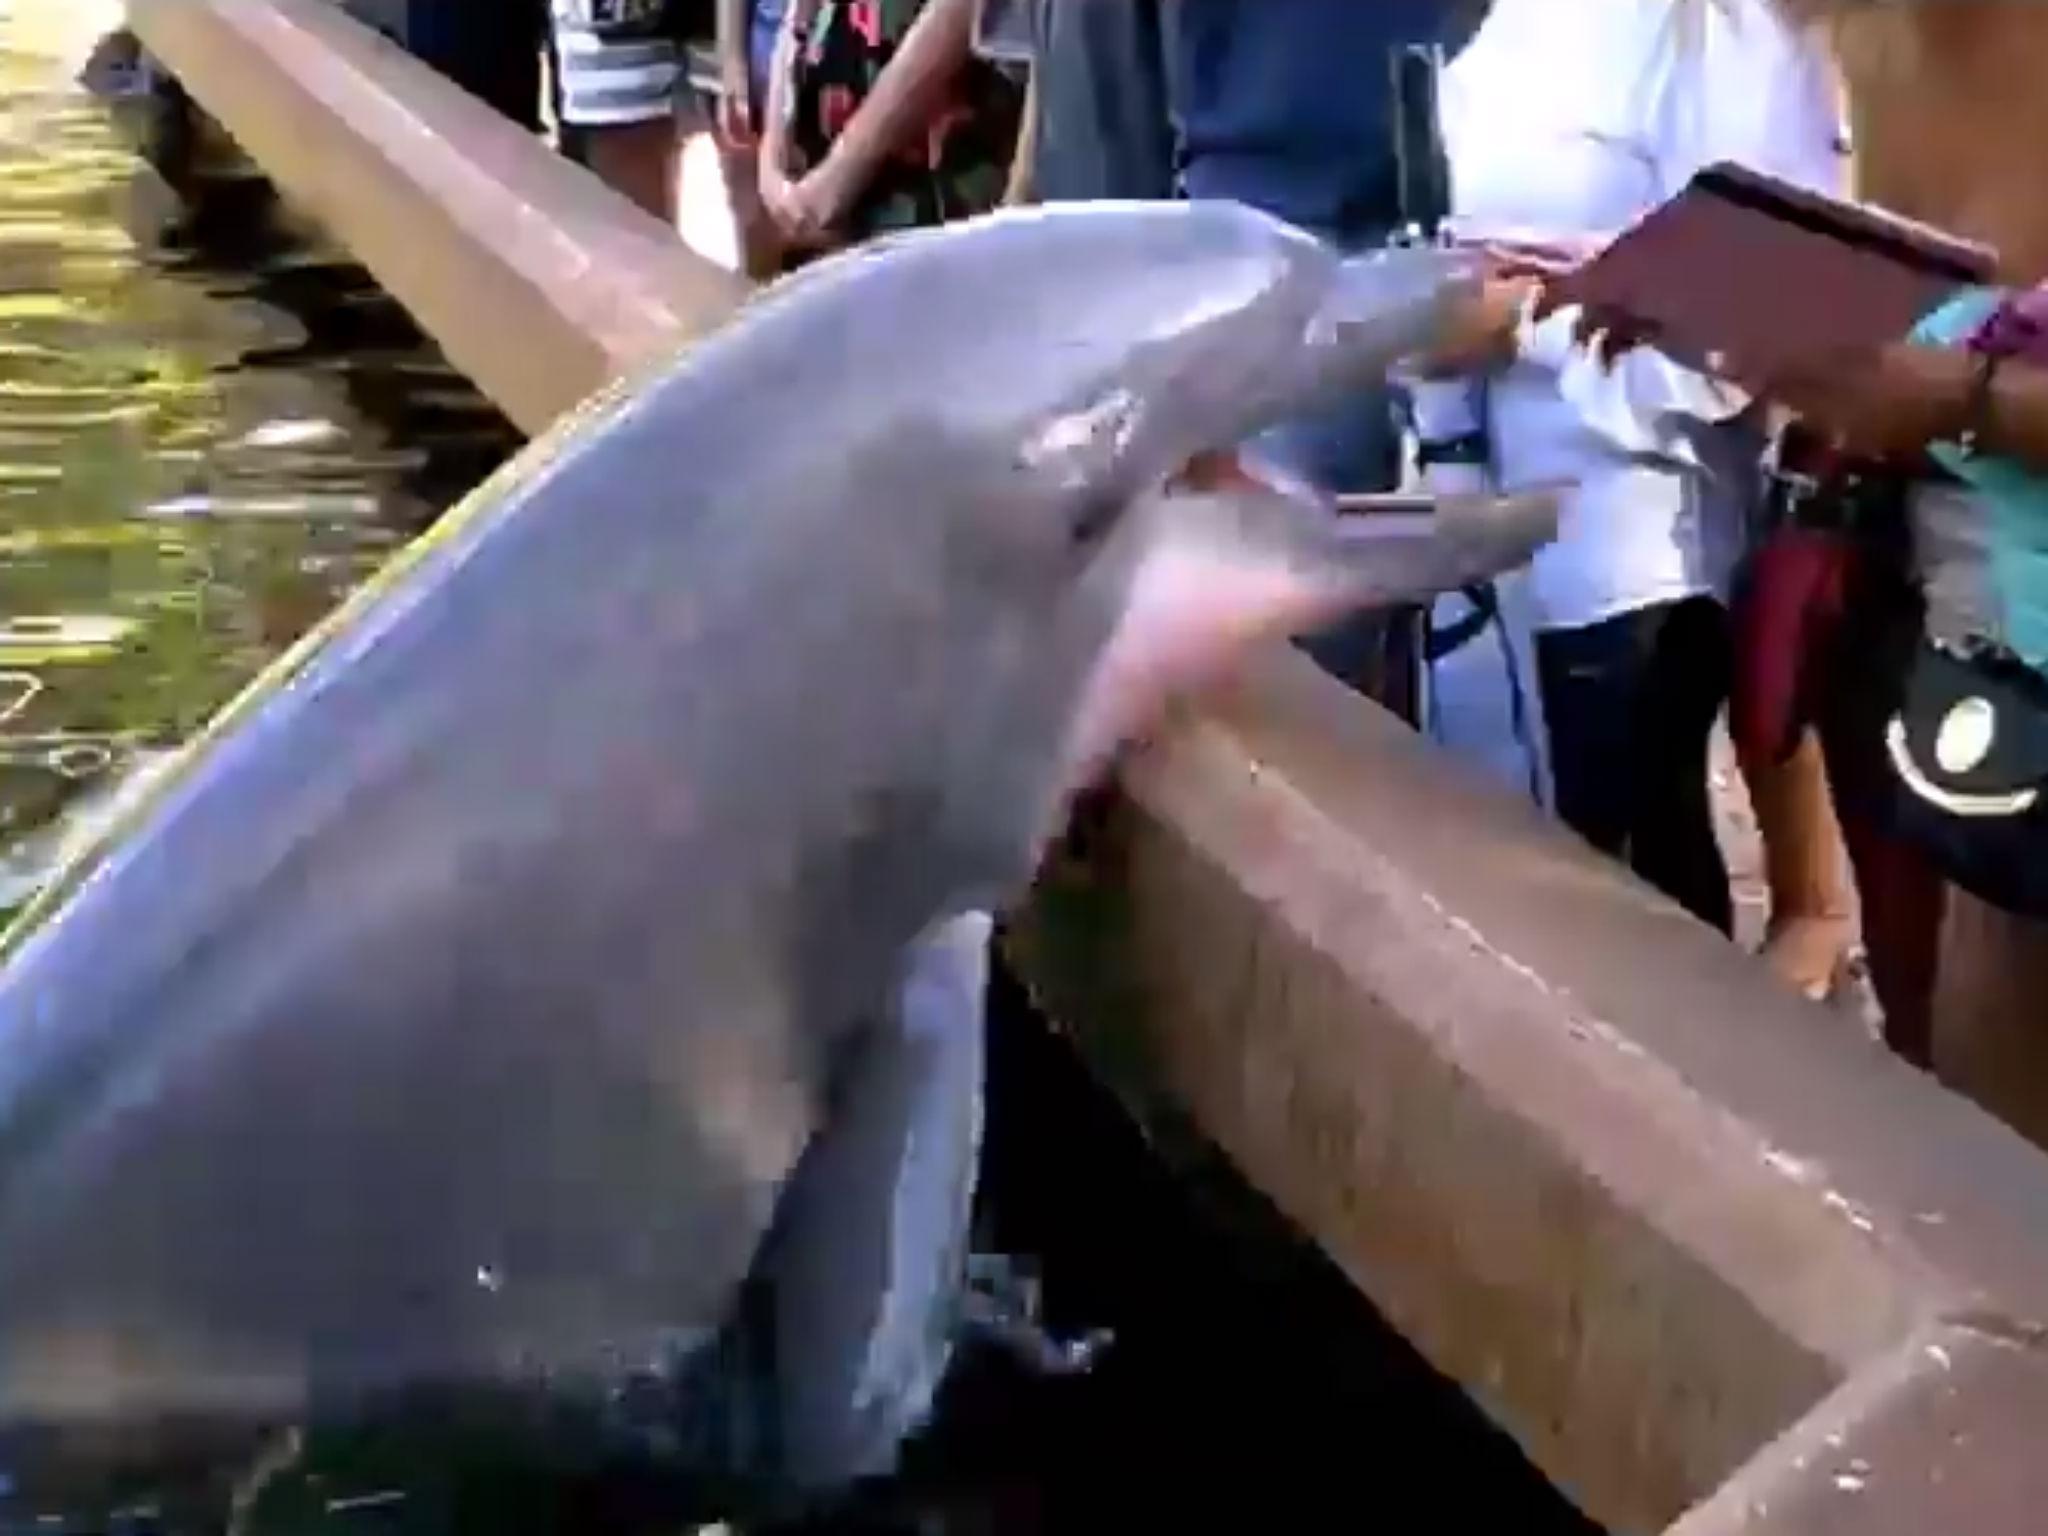 The dolphin is 'risking hurting or scratching its skin' by leaping out of the water